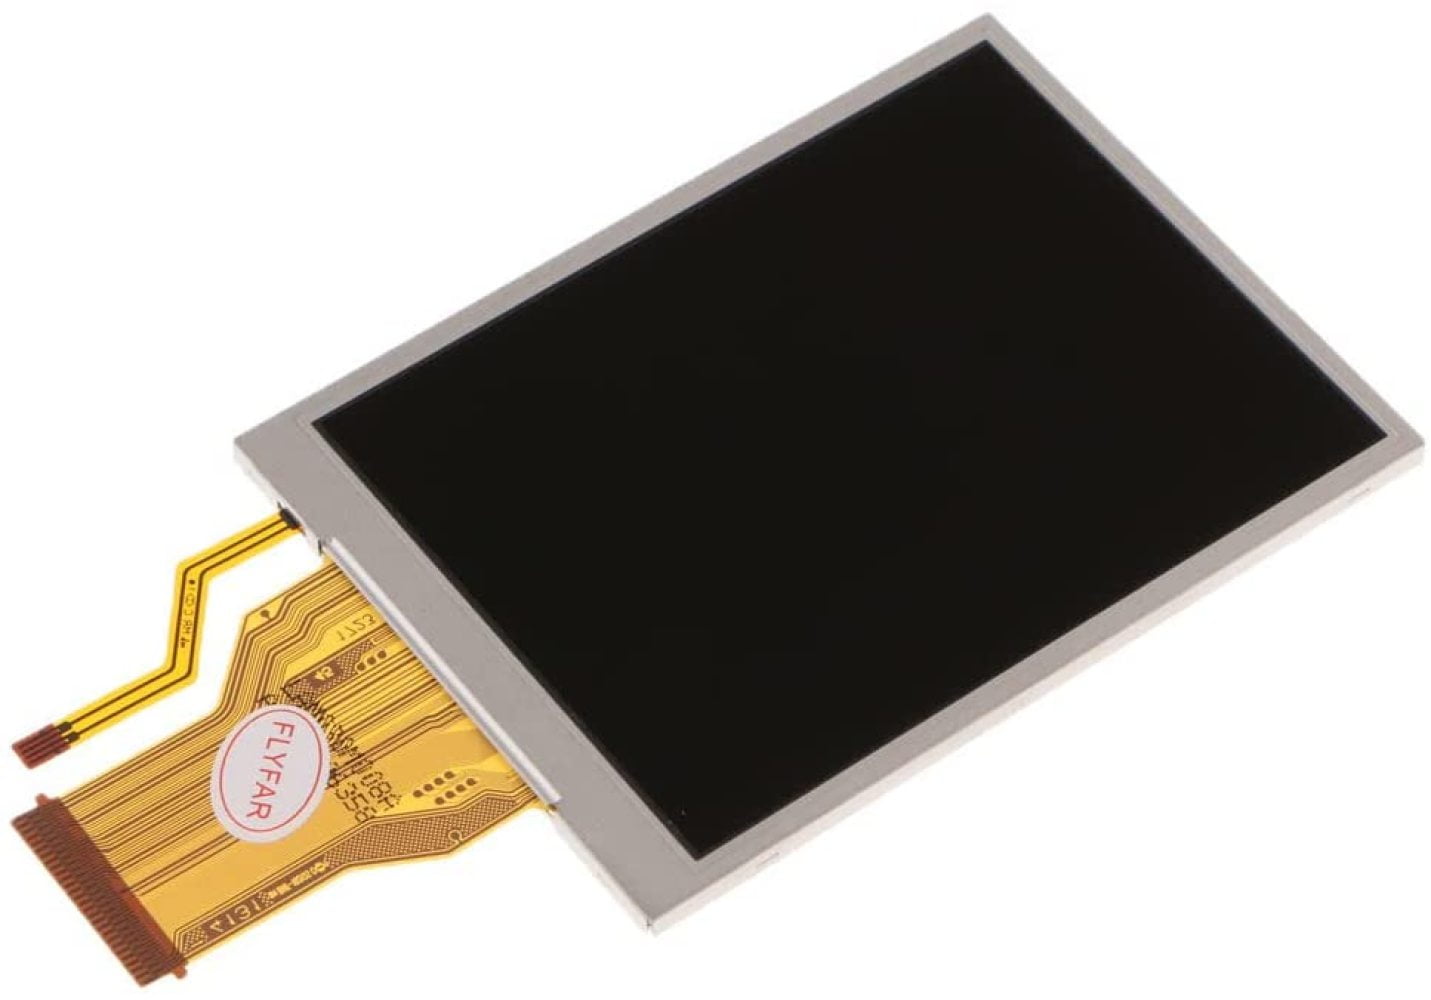 LCD Display Screen Replace for Nikon Coolpix S9900 P340 P530 P7800 L830 P600 